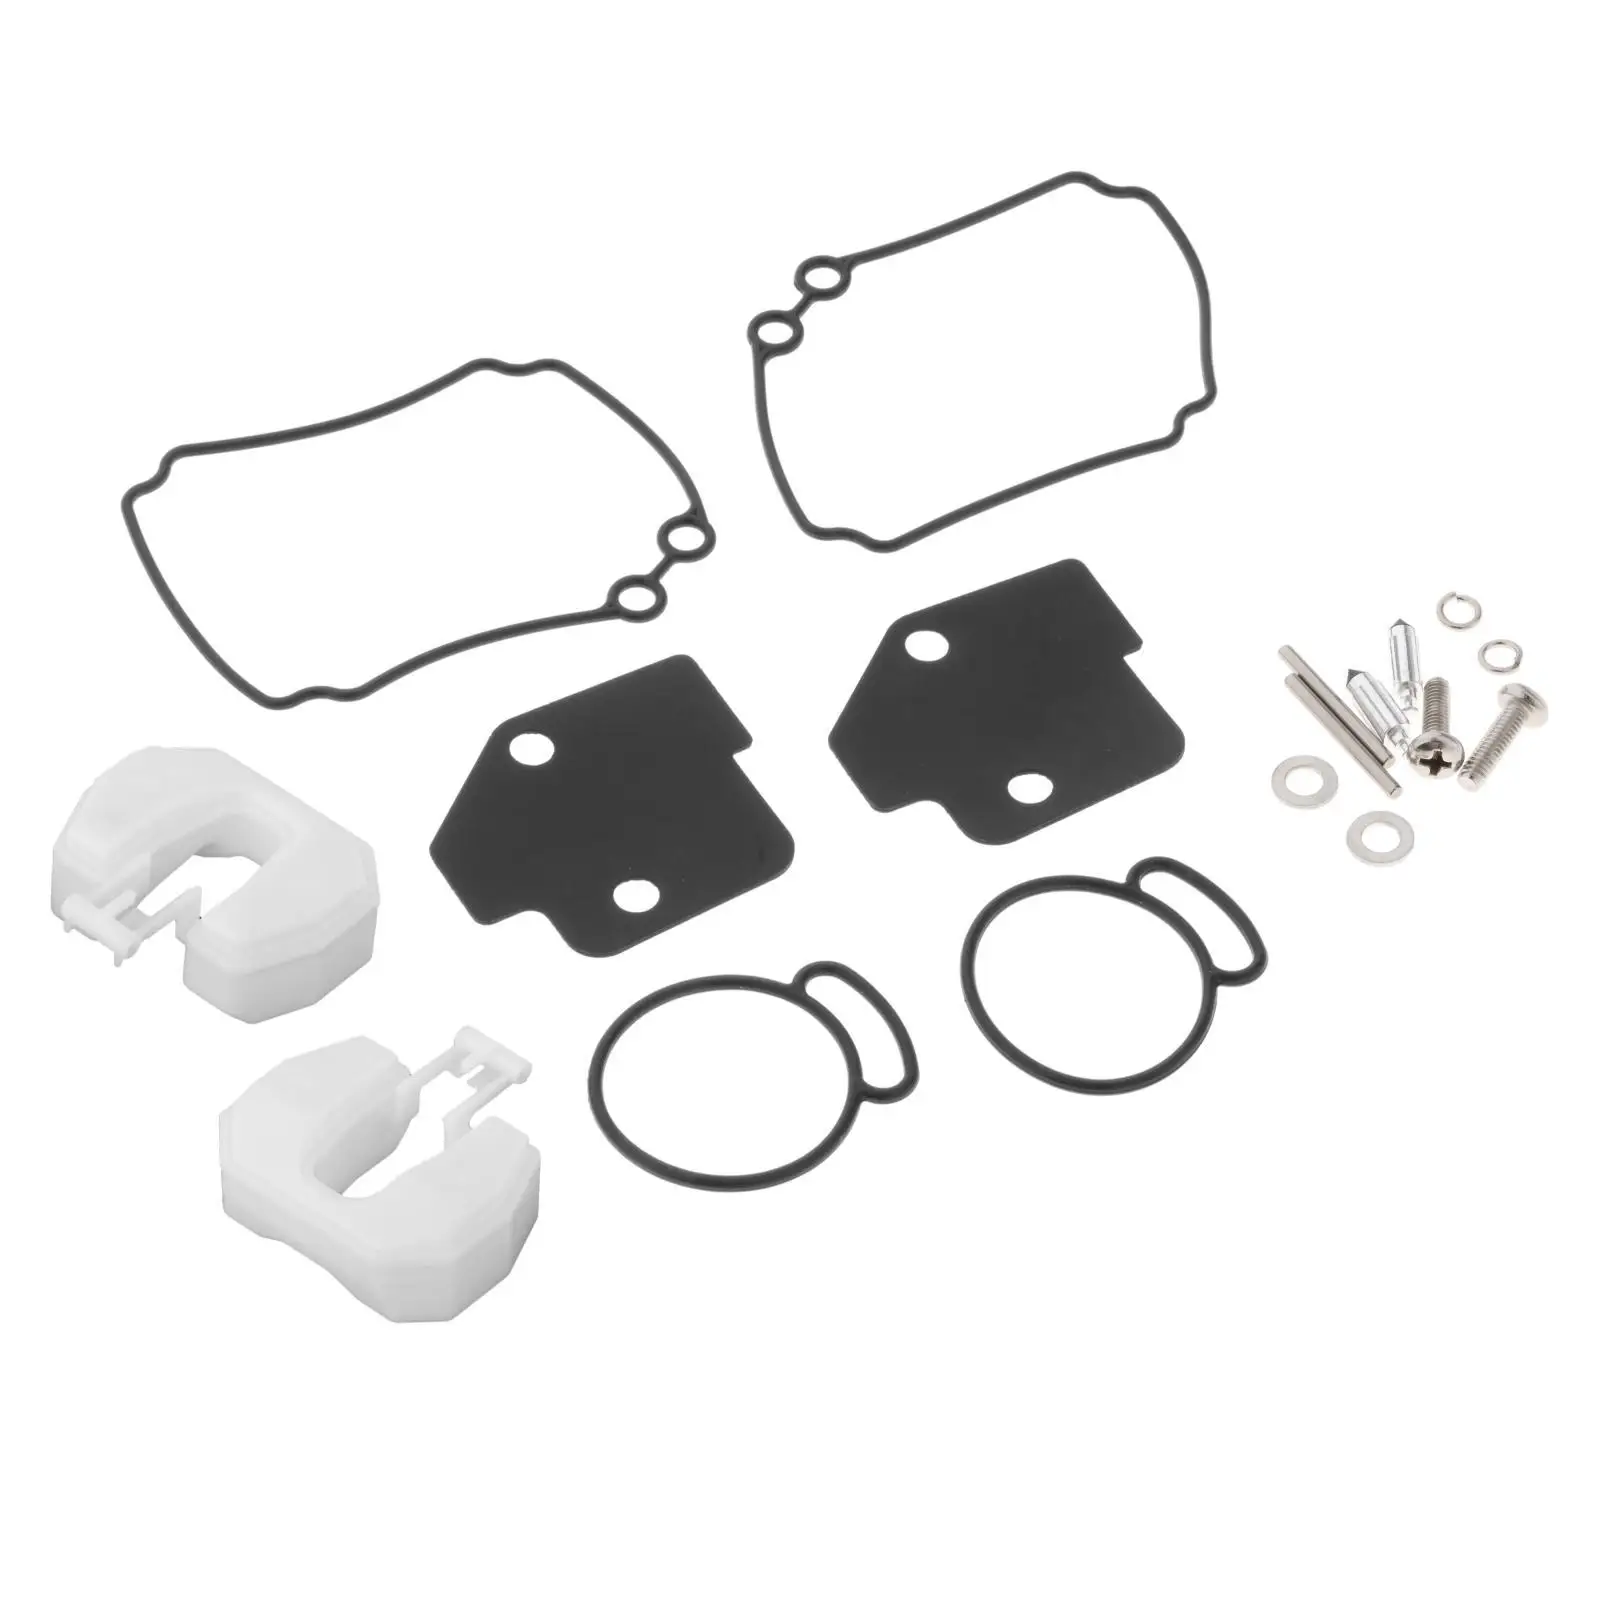 6L2-W0093-00-00 Carburetor Repair Kit Fit for Yamaha 2-Stroke Replacement High Reliability High Performance Accessory